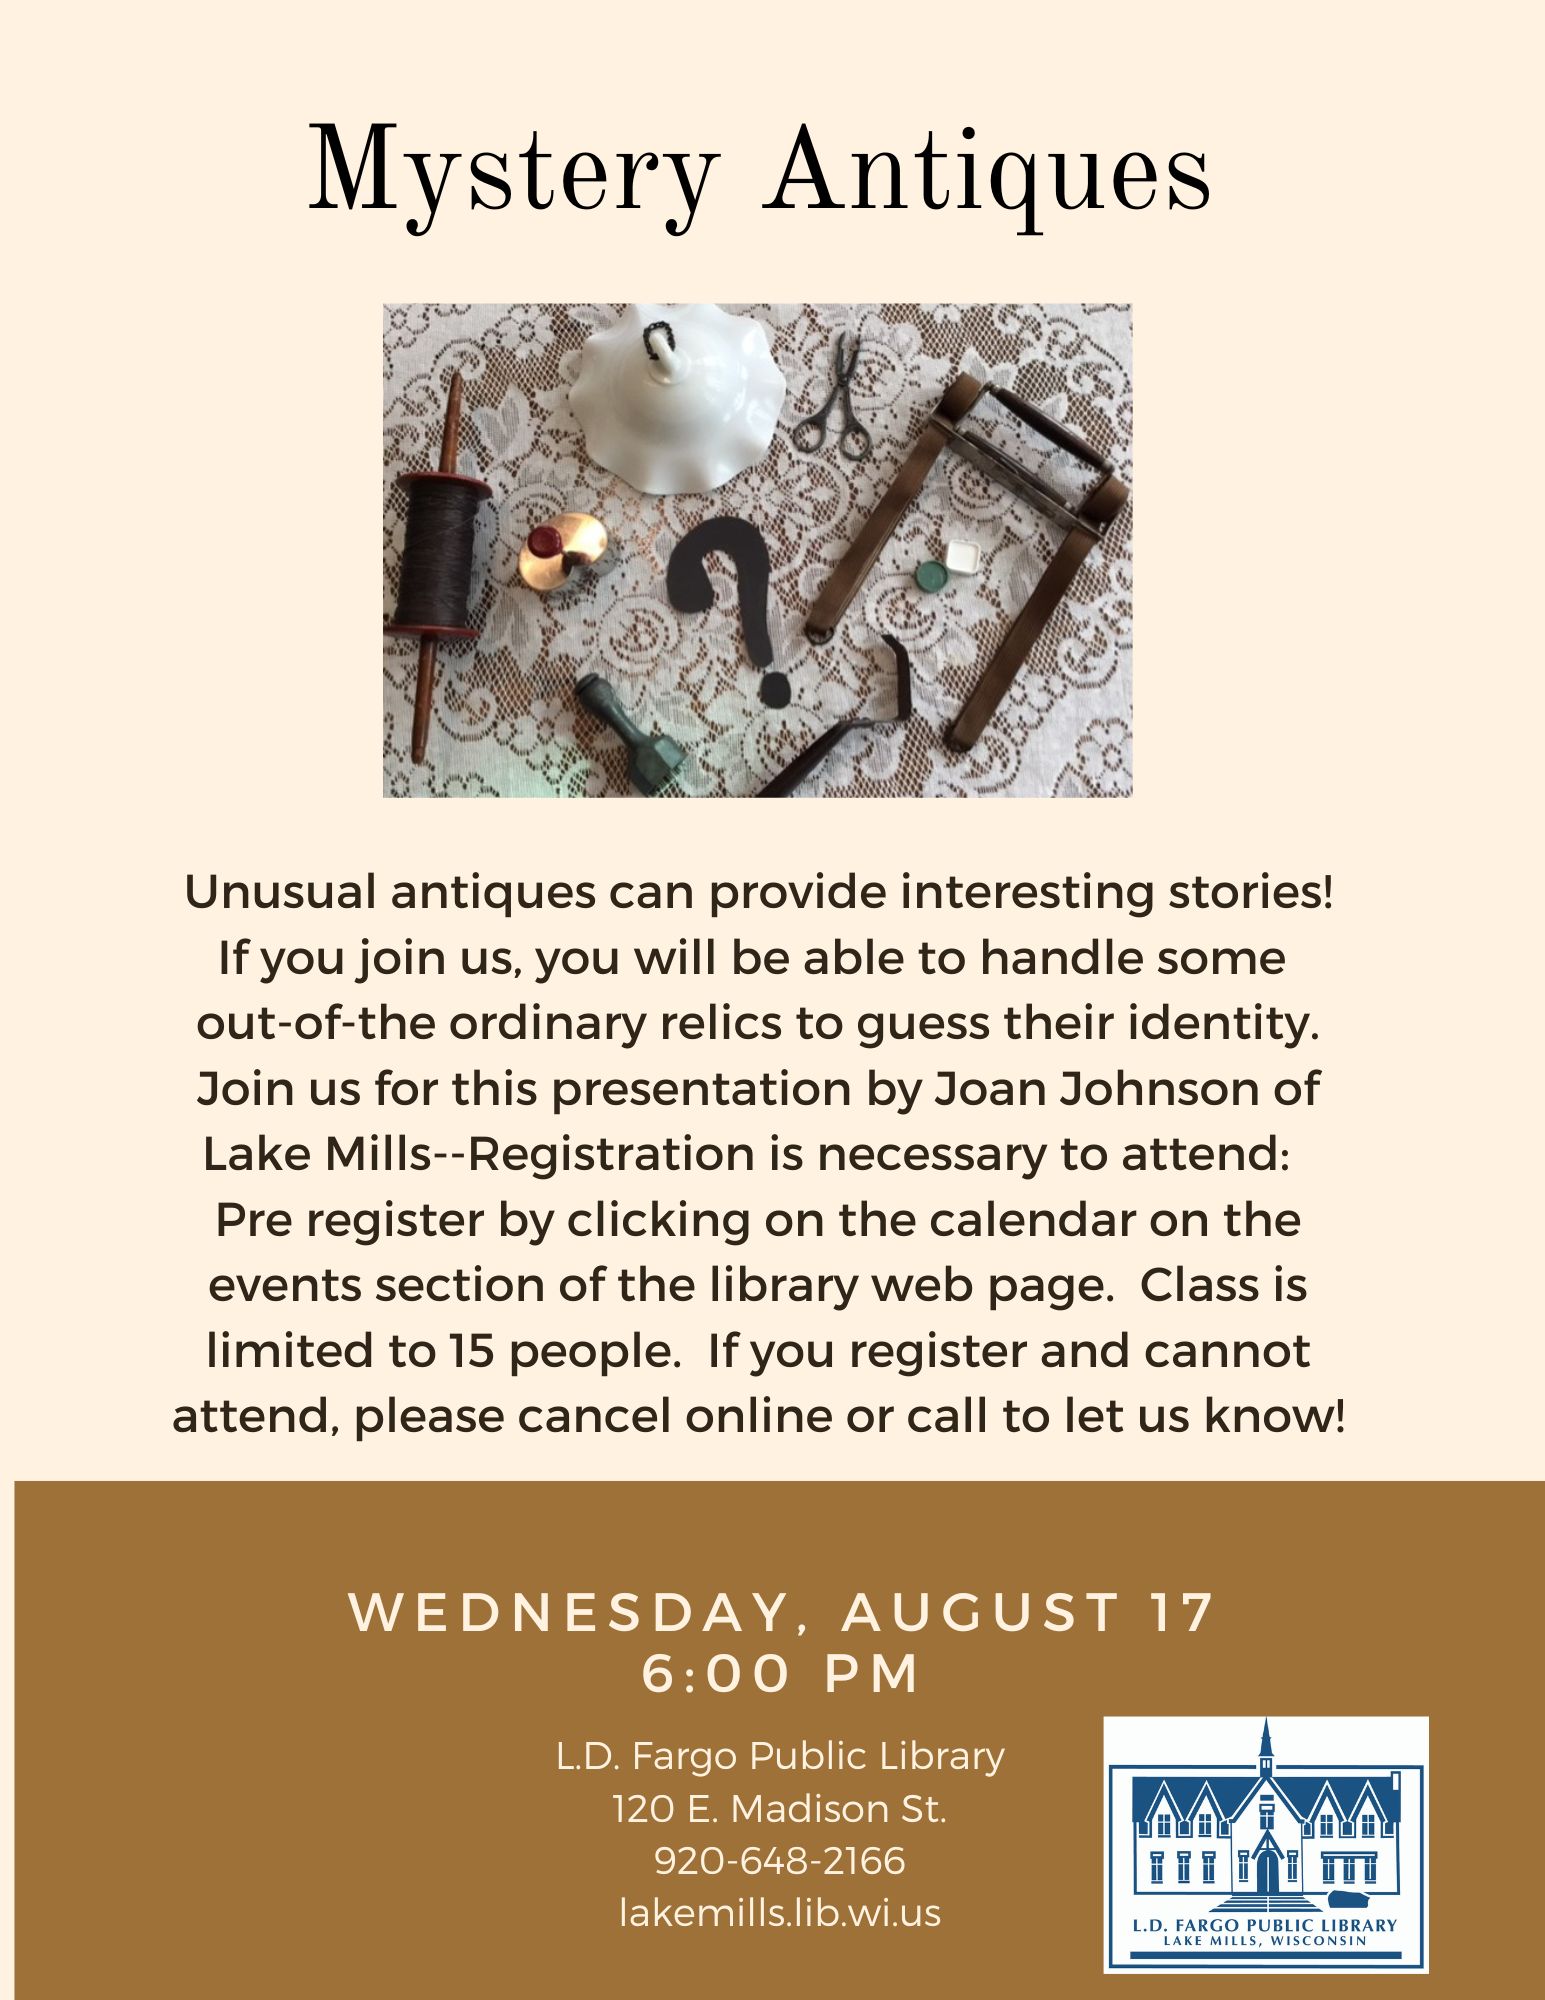 Mystery Antiques.  Wednesday August 17 at 6:00 PM.  Registration Required.